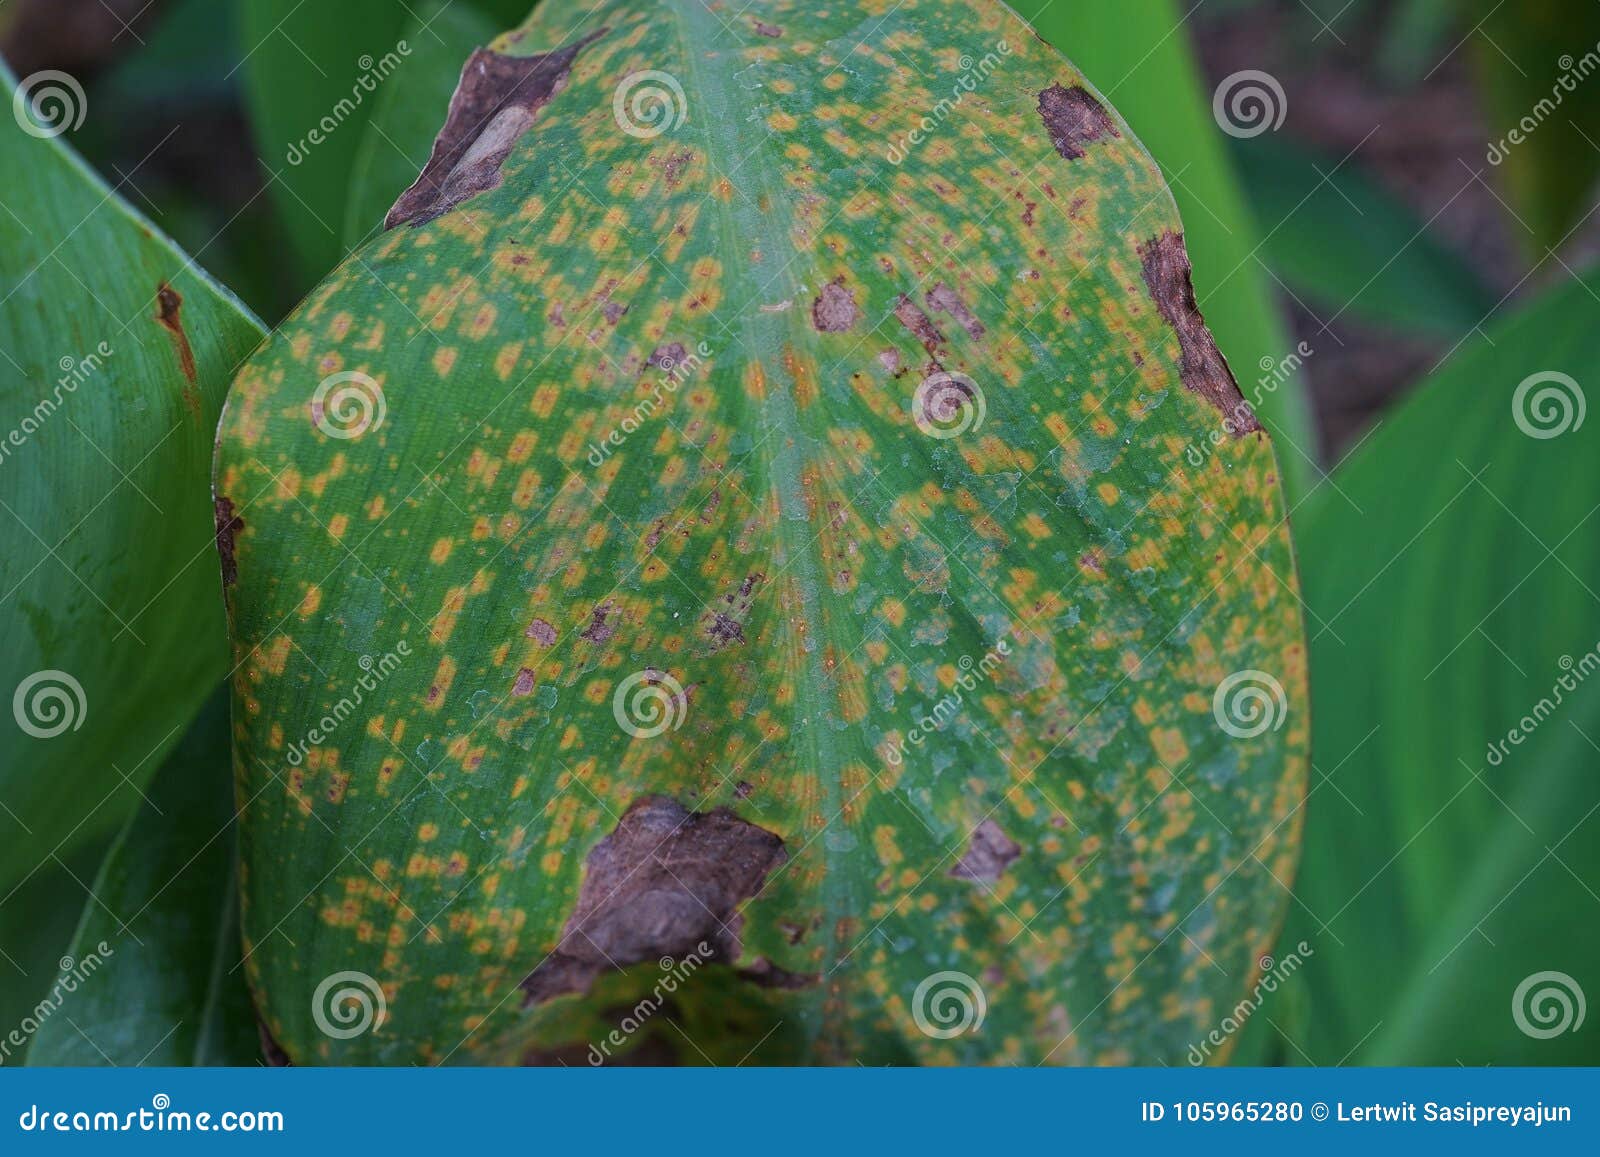 Plant Disease Causes by Fungi on Flower Plant Leaves `canna Flower` Stock  Photo - Image of beauty, canna: 105965280